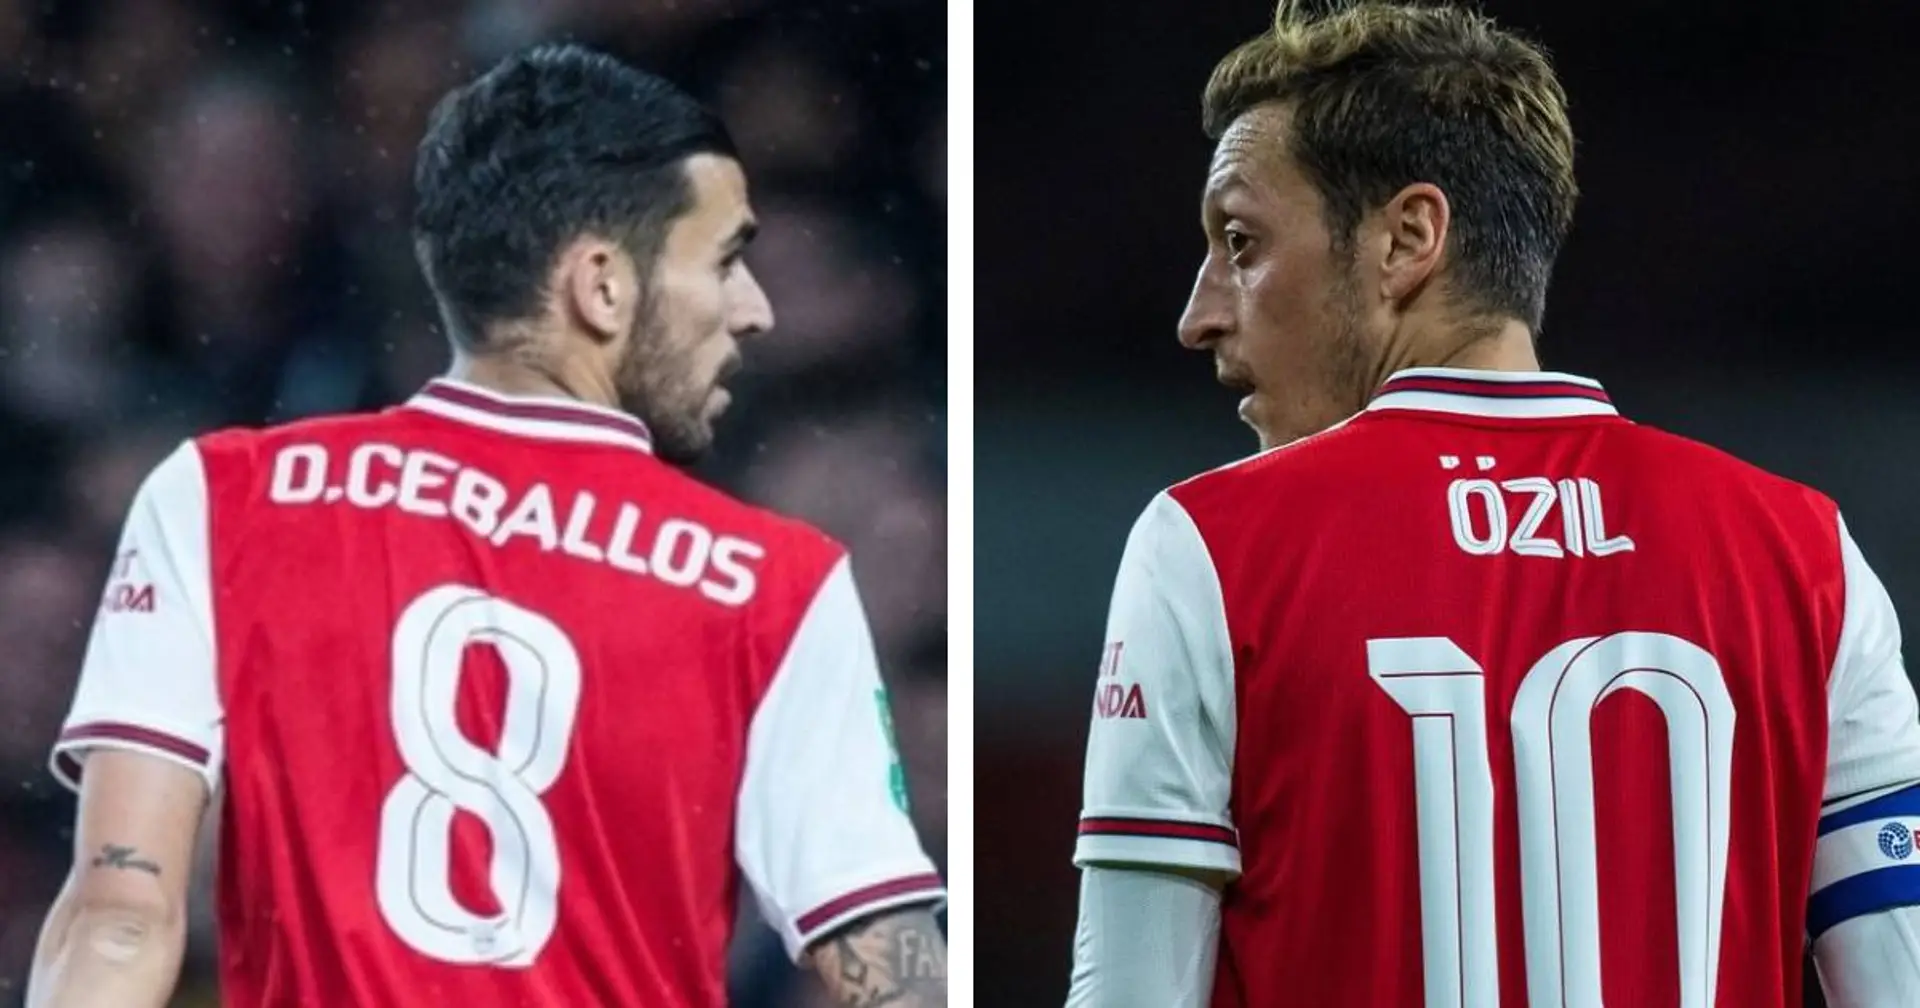 8 'attractive' squad numbers Arsenal could offer to potential newcomers